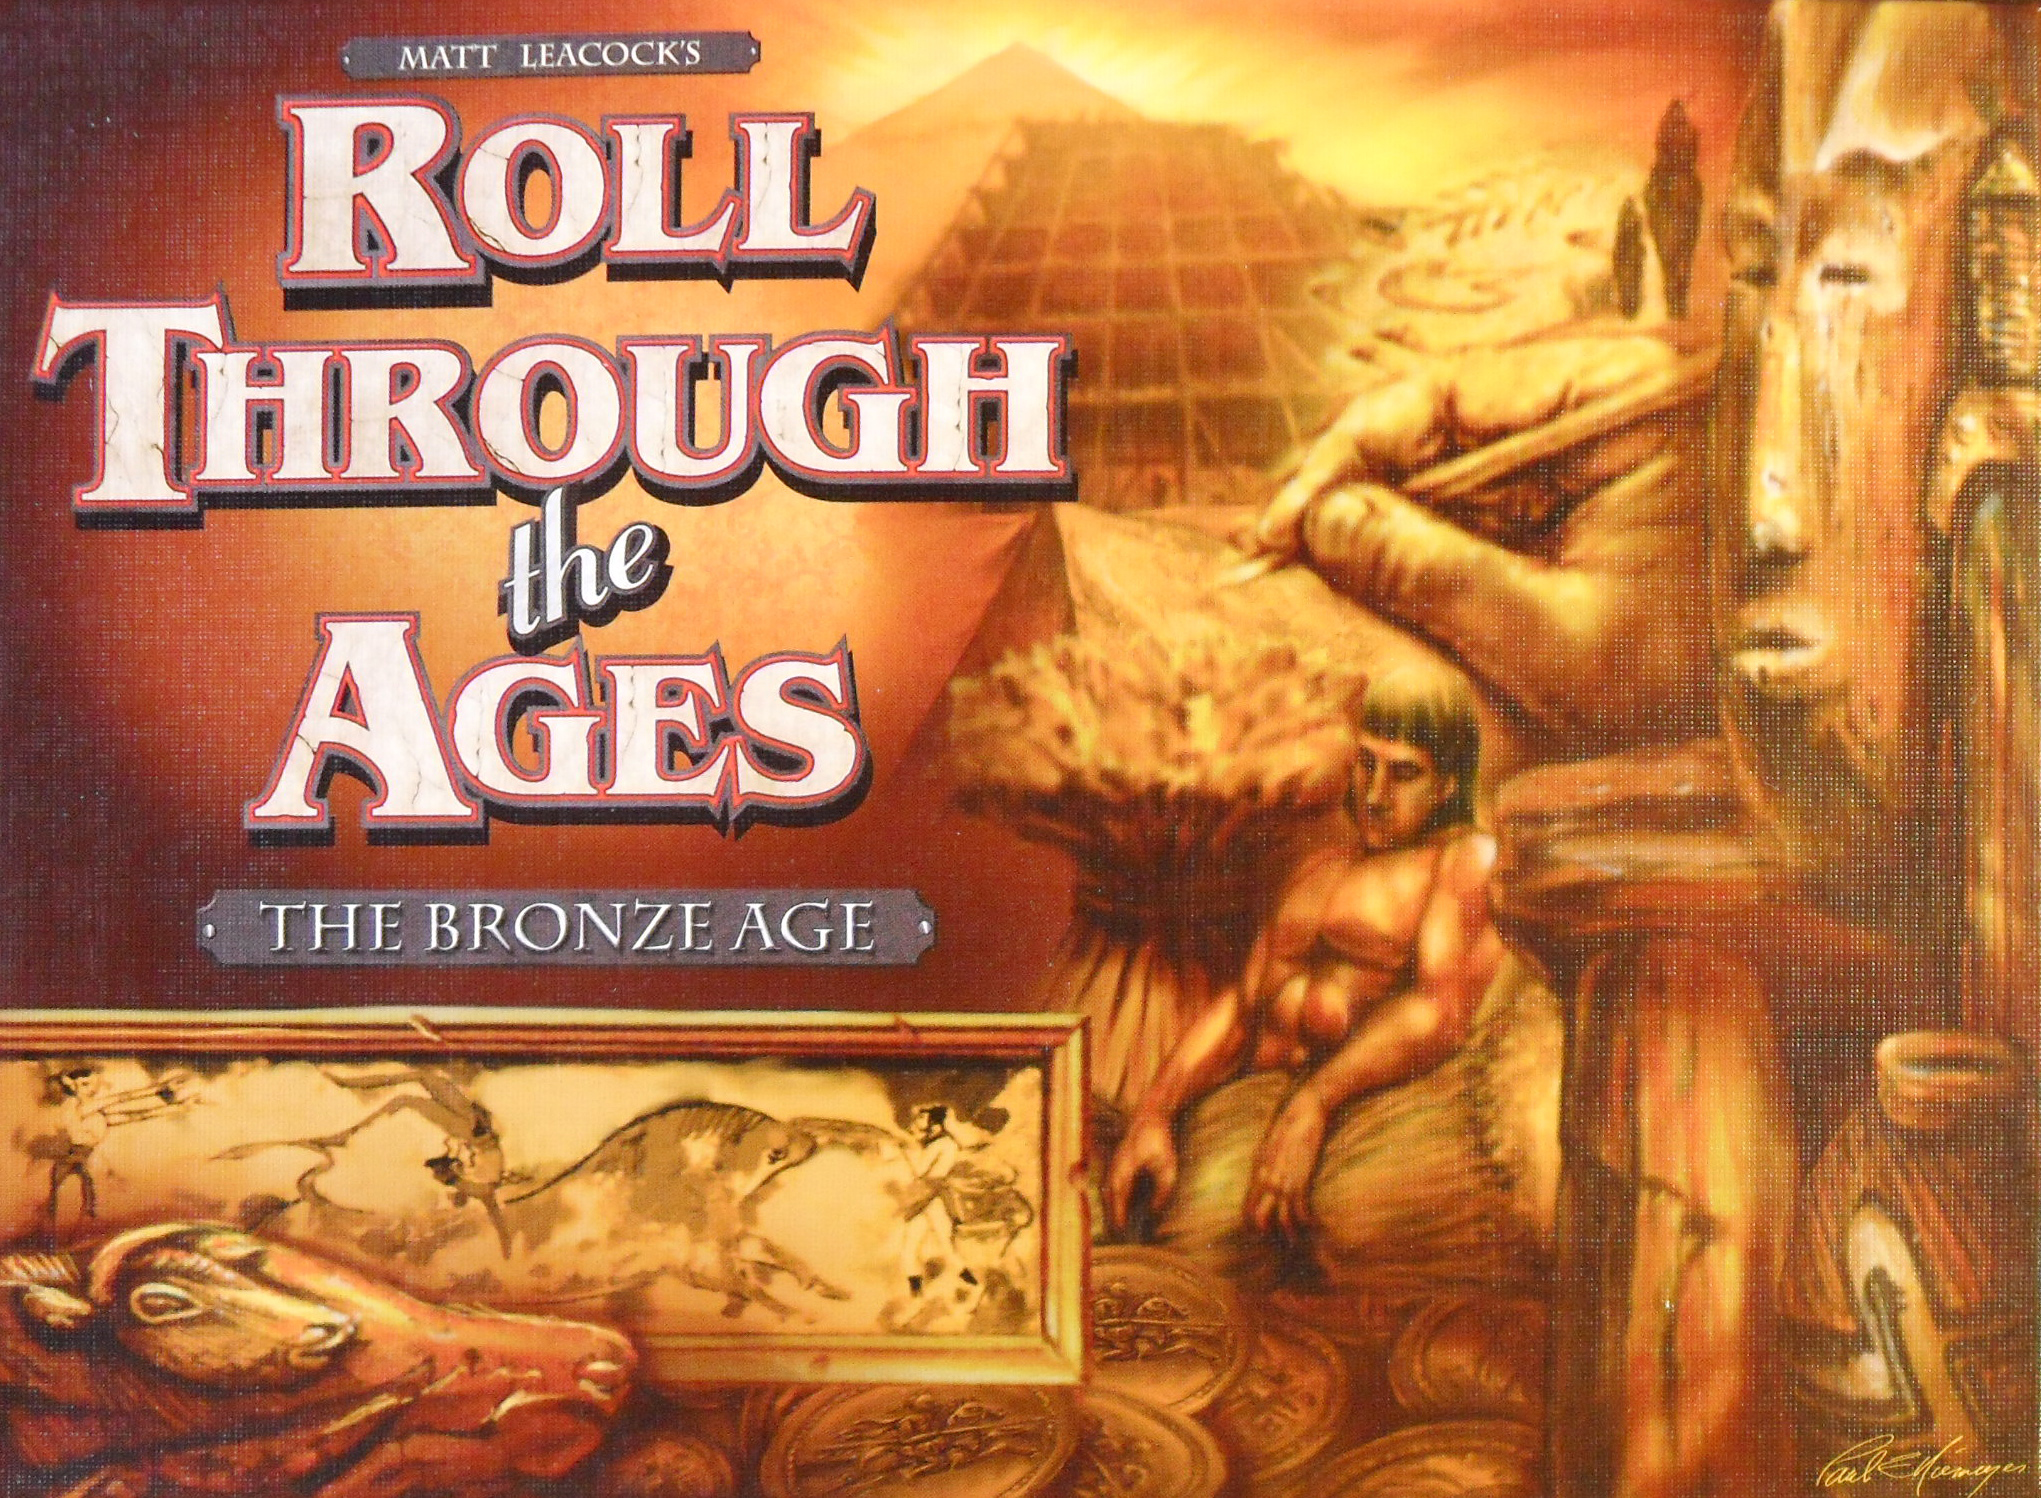 Roll Through the Ages - The Bronze Age (#2)